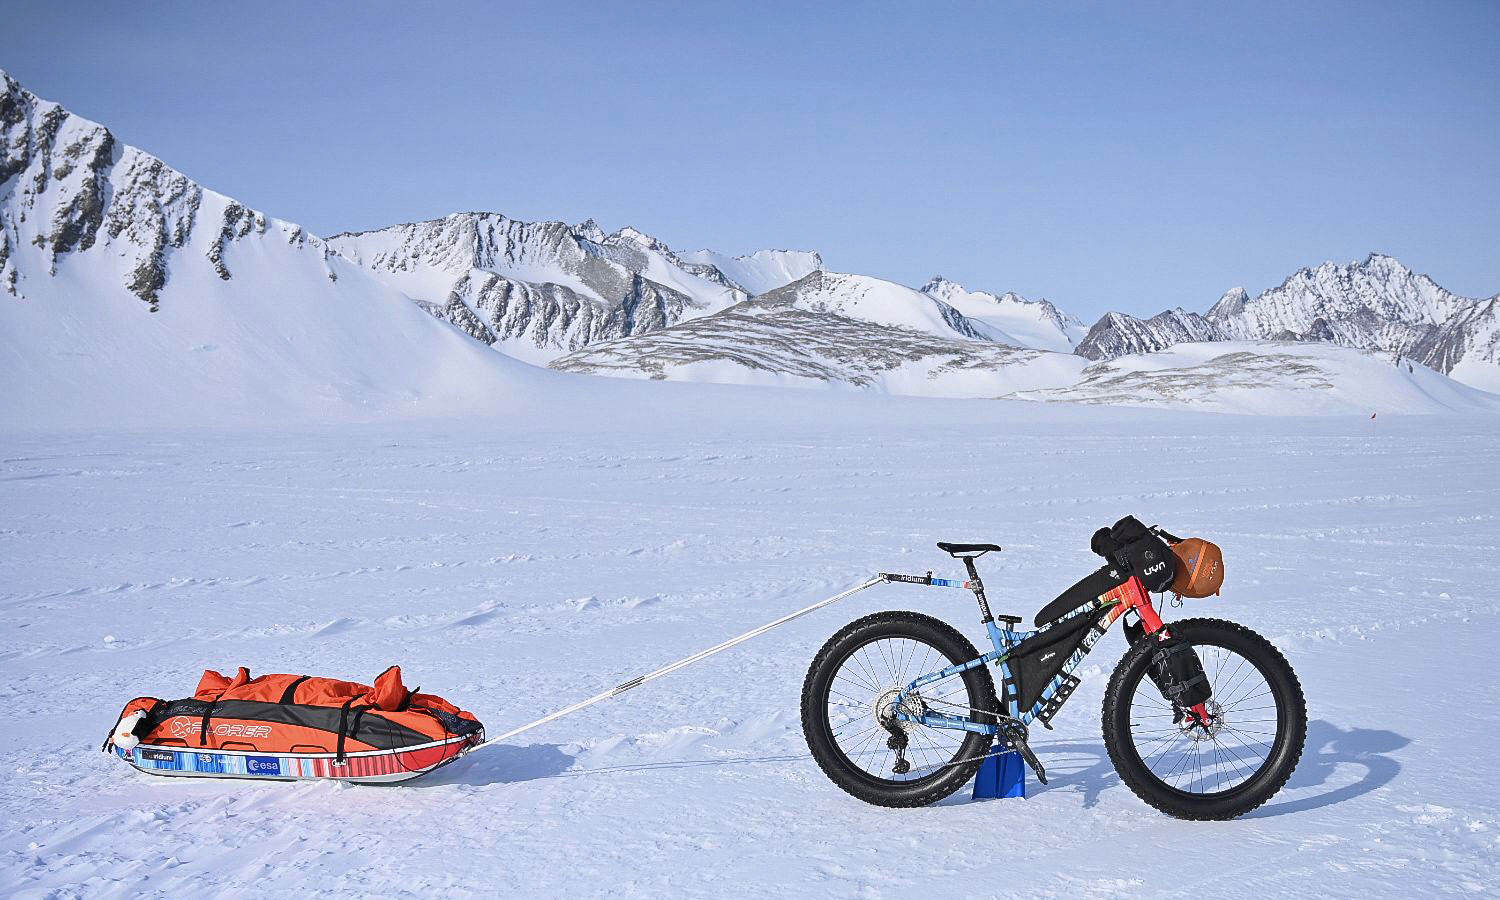 Omar di Felice Antarctica Unlimited solo crossing by fat bike, fatbike expedition for climate change awareness, ready for adventure